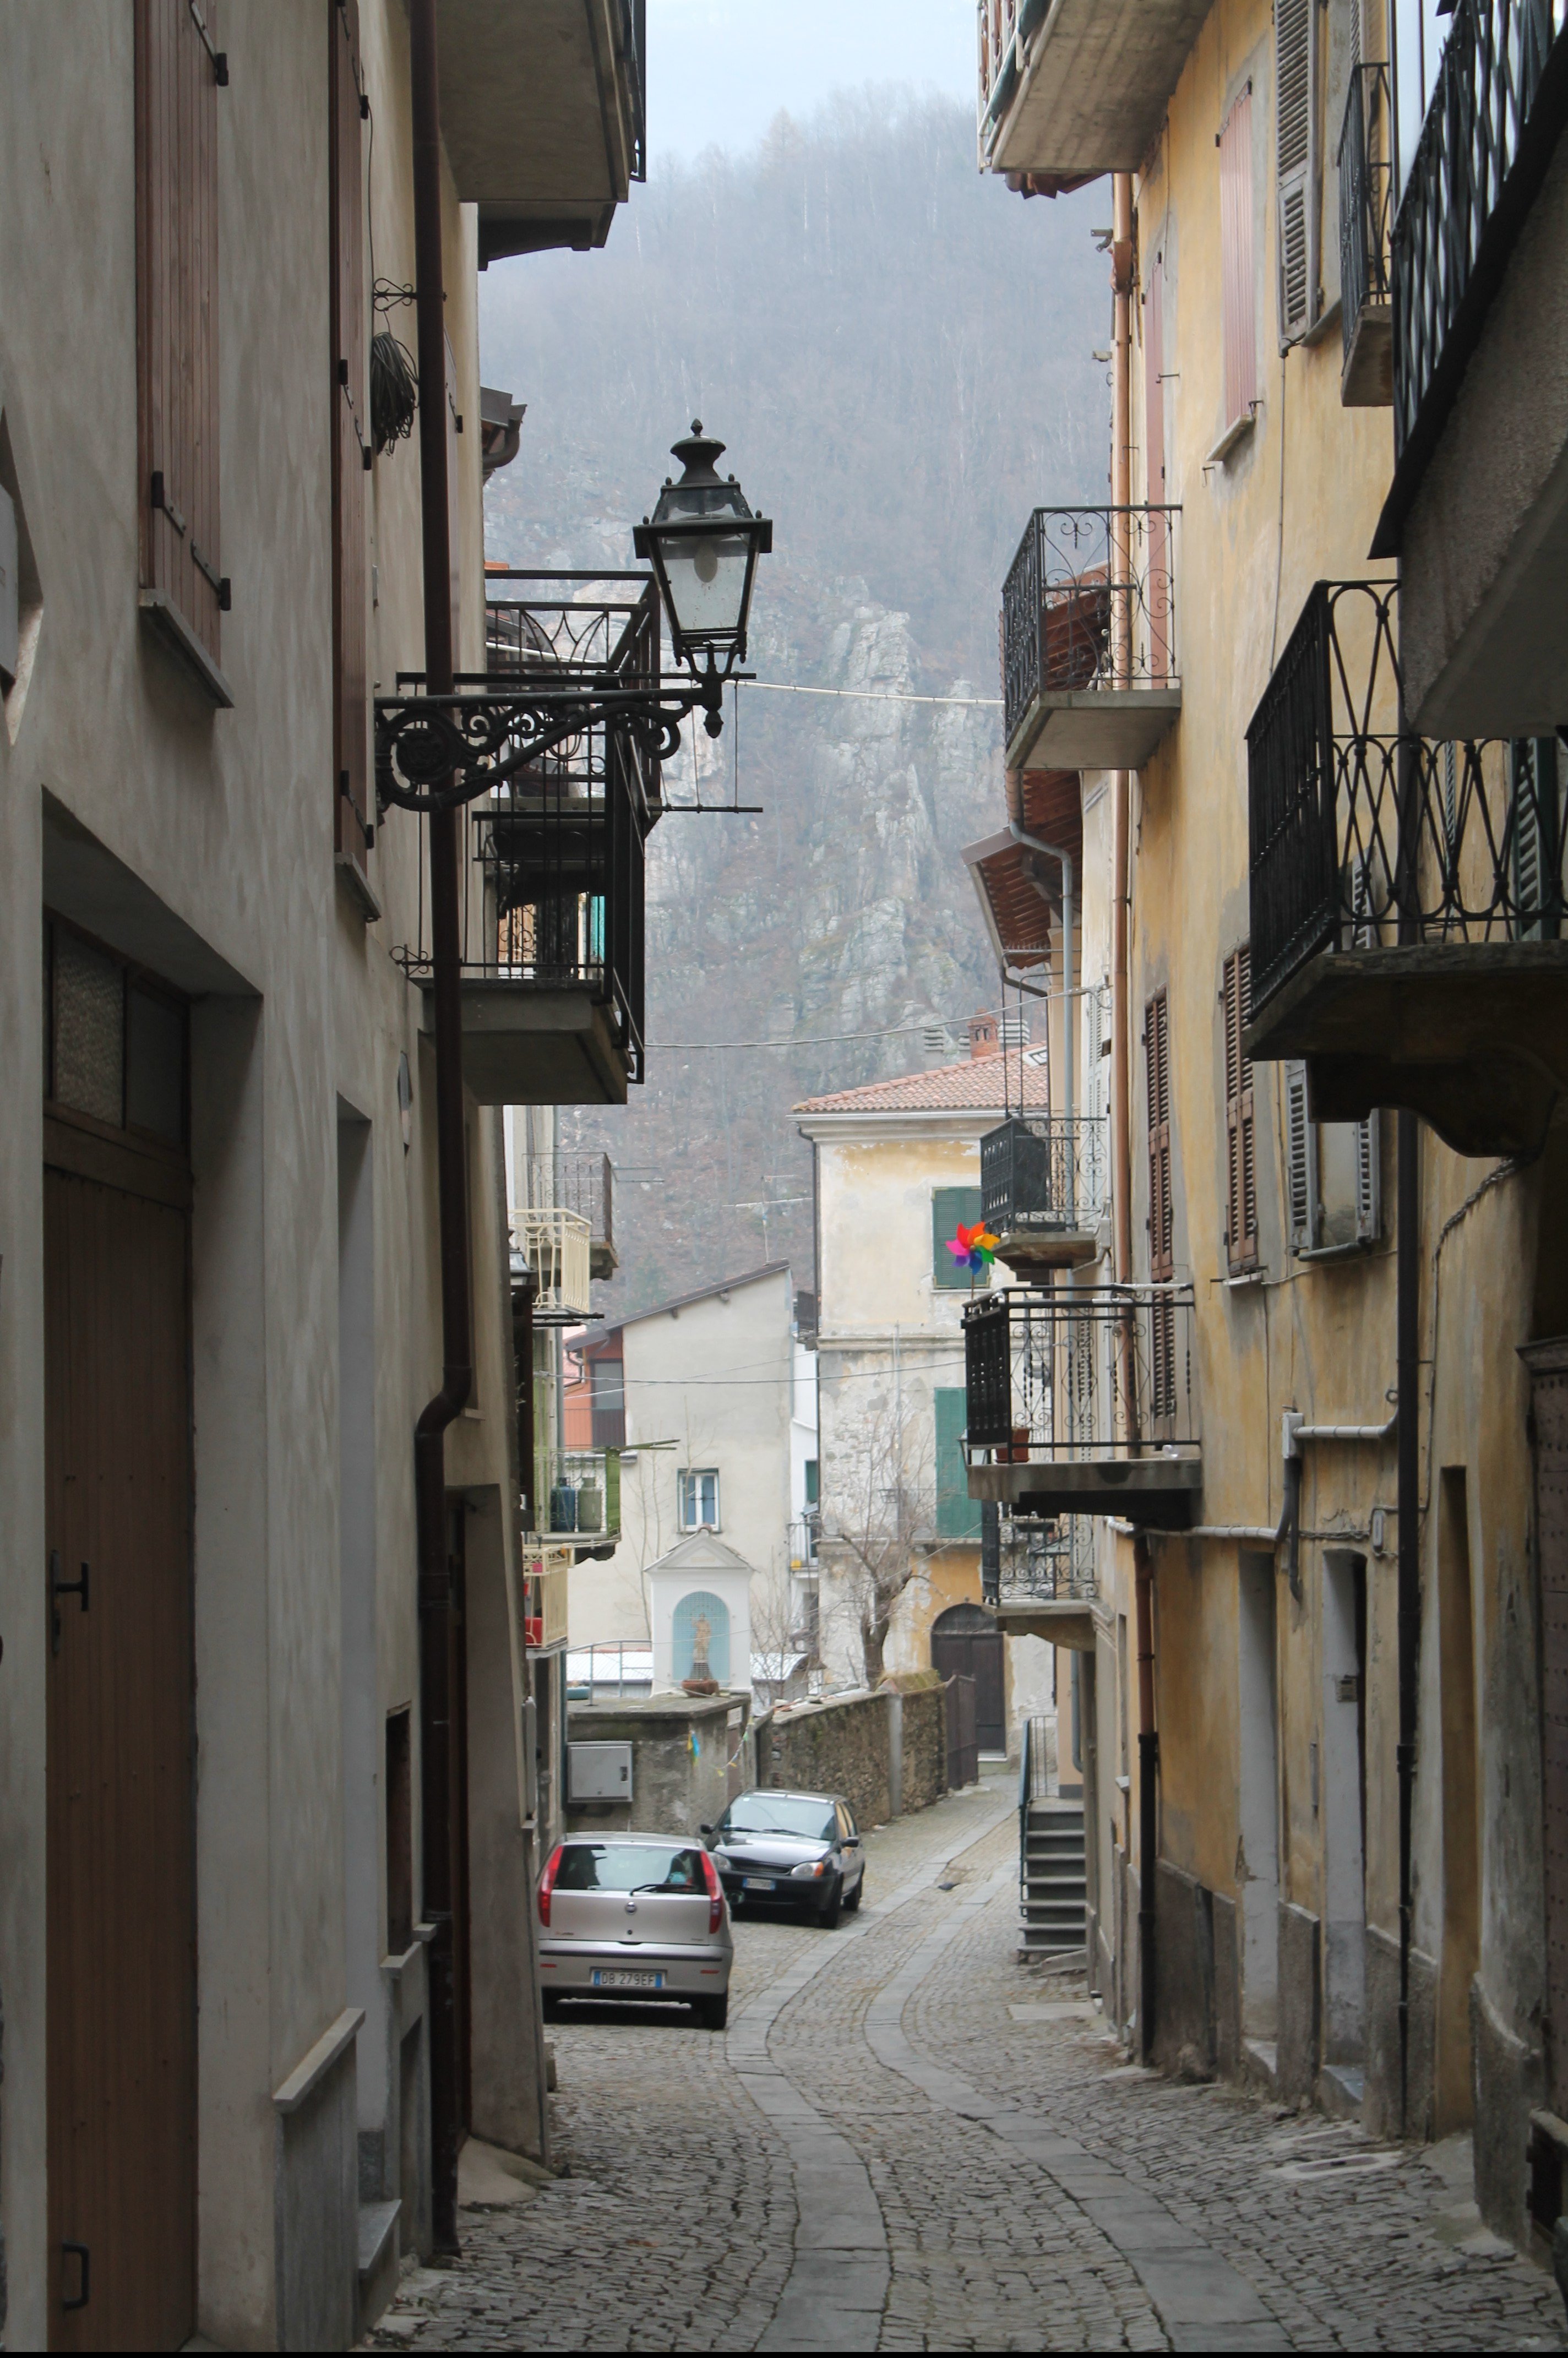 A Cold Afternoon in Ormea, Piemonte